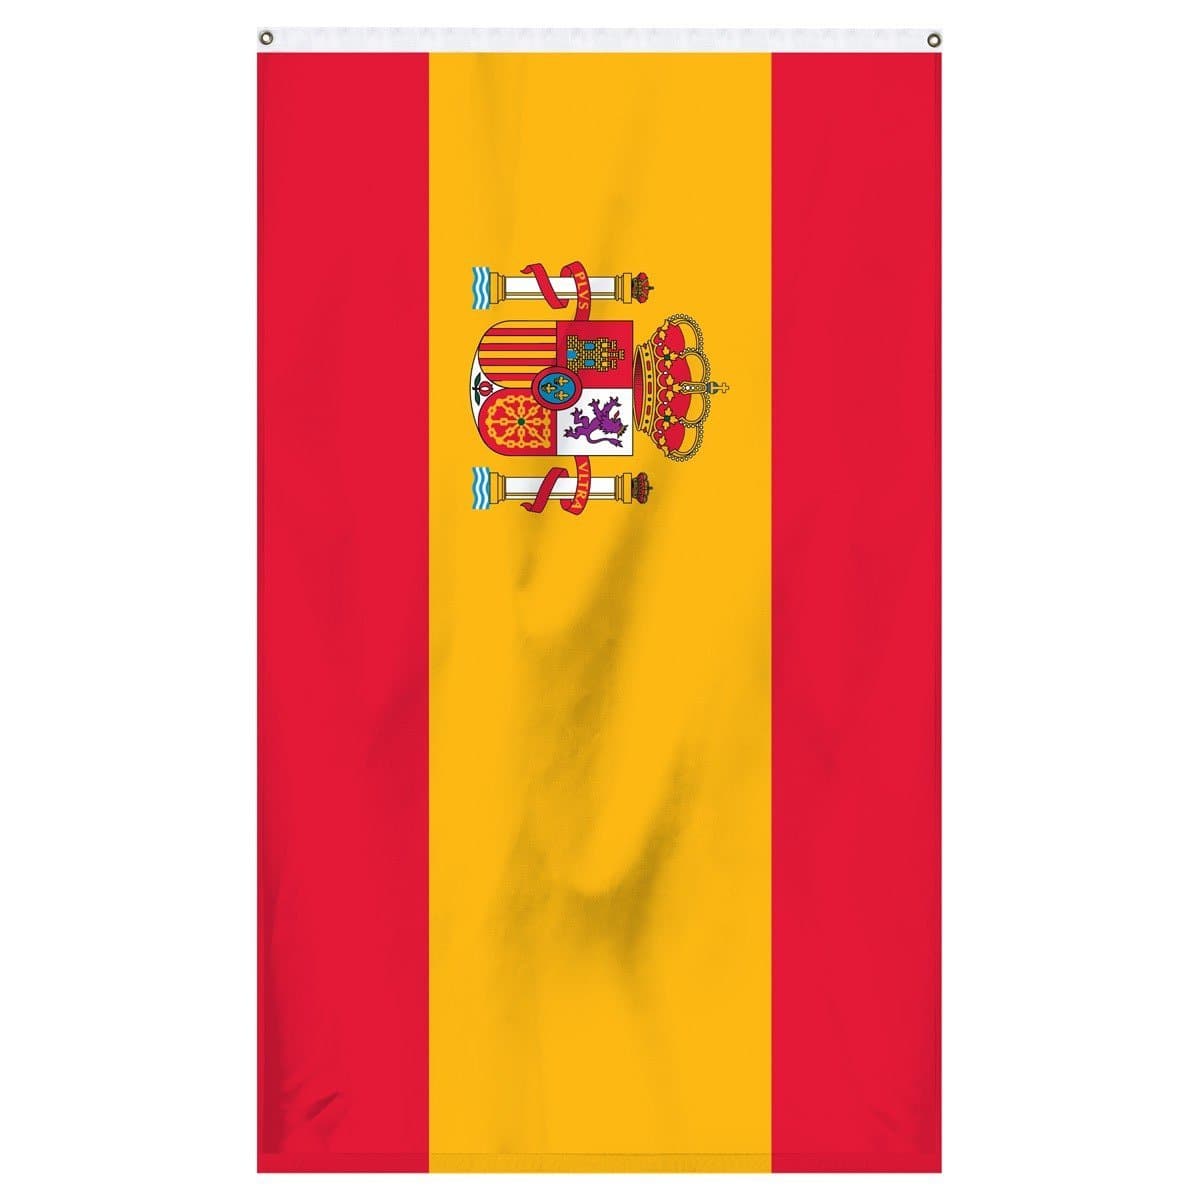 Spain National flag for sale to buy online from Atlantic Flag and Pole. Red and yellow flag with Spanish coat of arms.